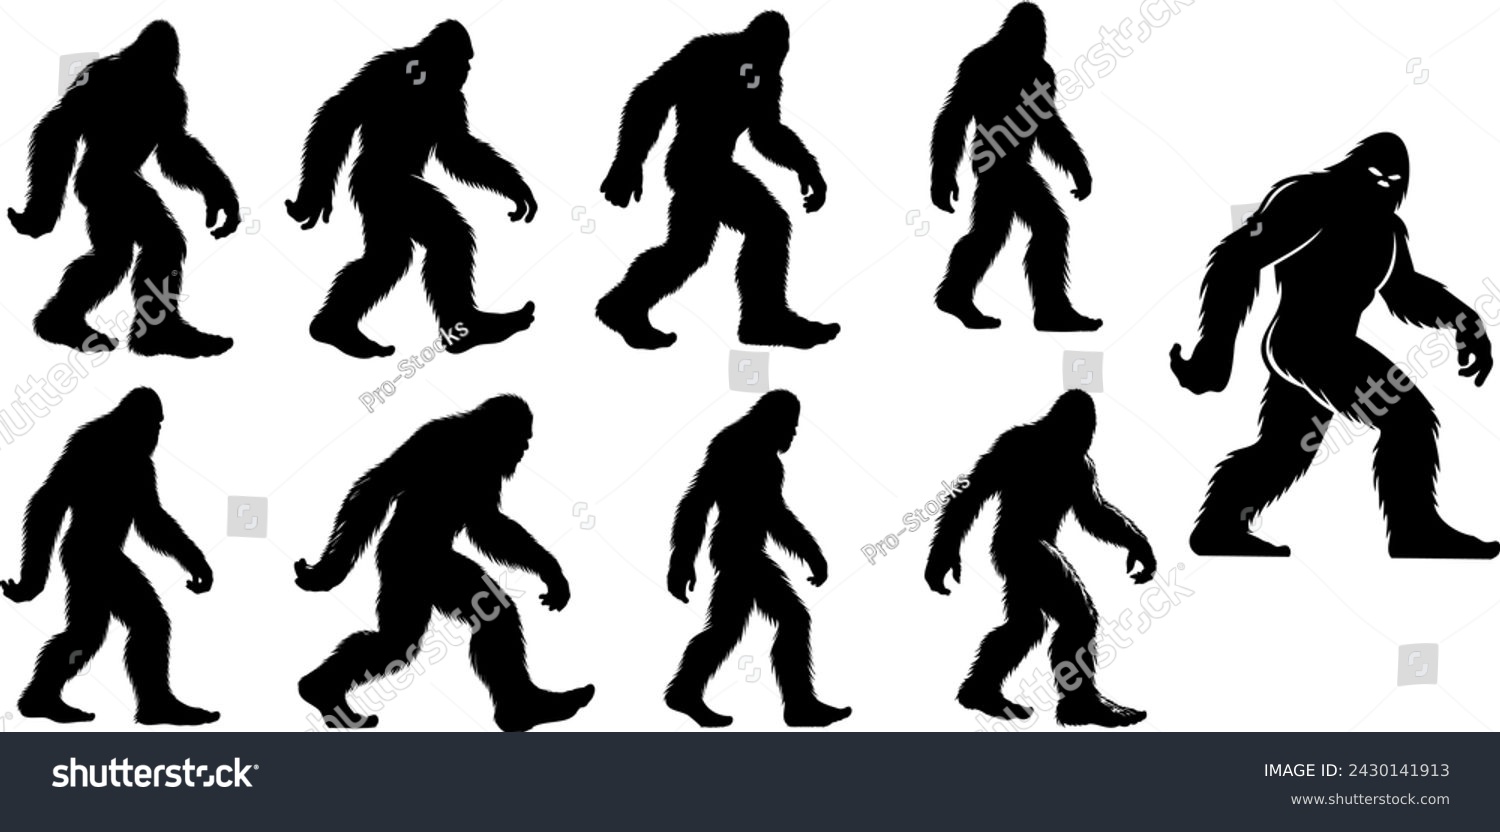 SVG of Bigfoot silhouette, cryptid, mystery, folklore, walking bigfoot pose, mythical, creature, legend, Sasquatch, Yeti, beast, monster, enigma, shadowy figure svg